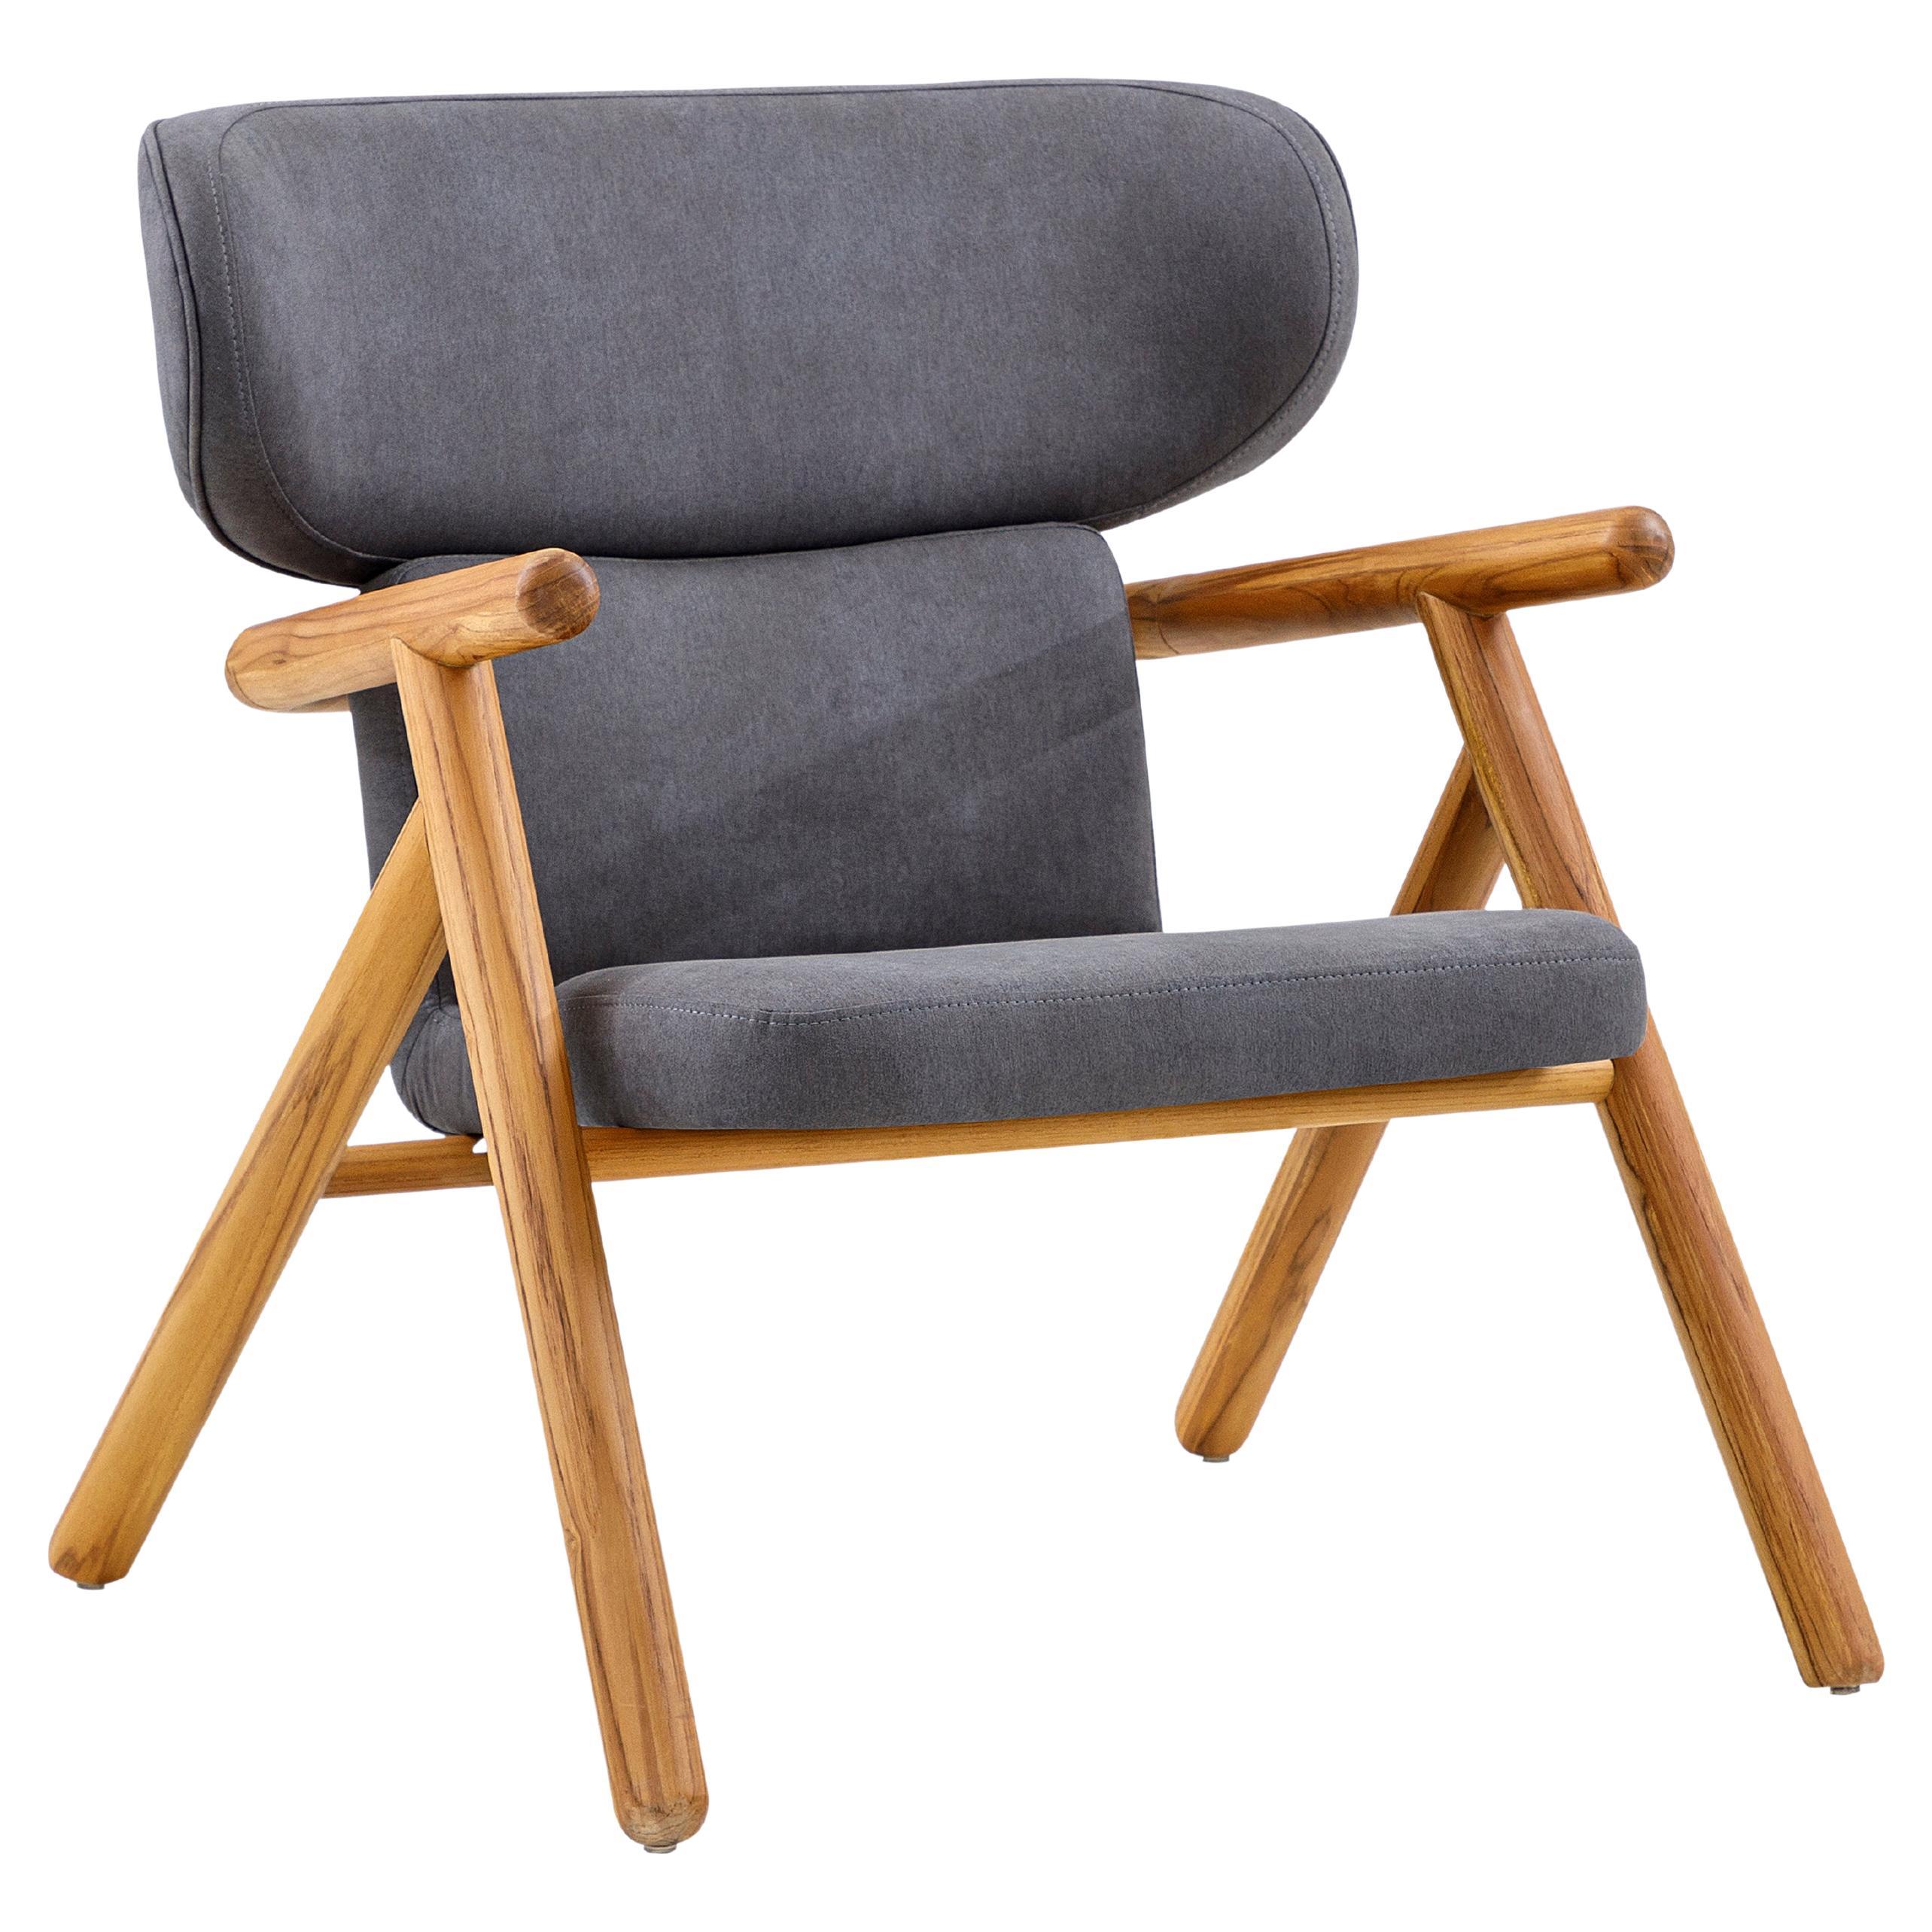 Sole Scandinavian-Styled Armchair in Teak Wood Finish and Charcoal Fabric